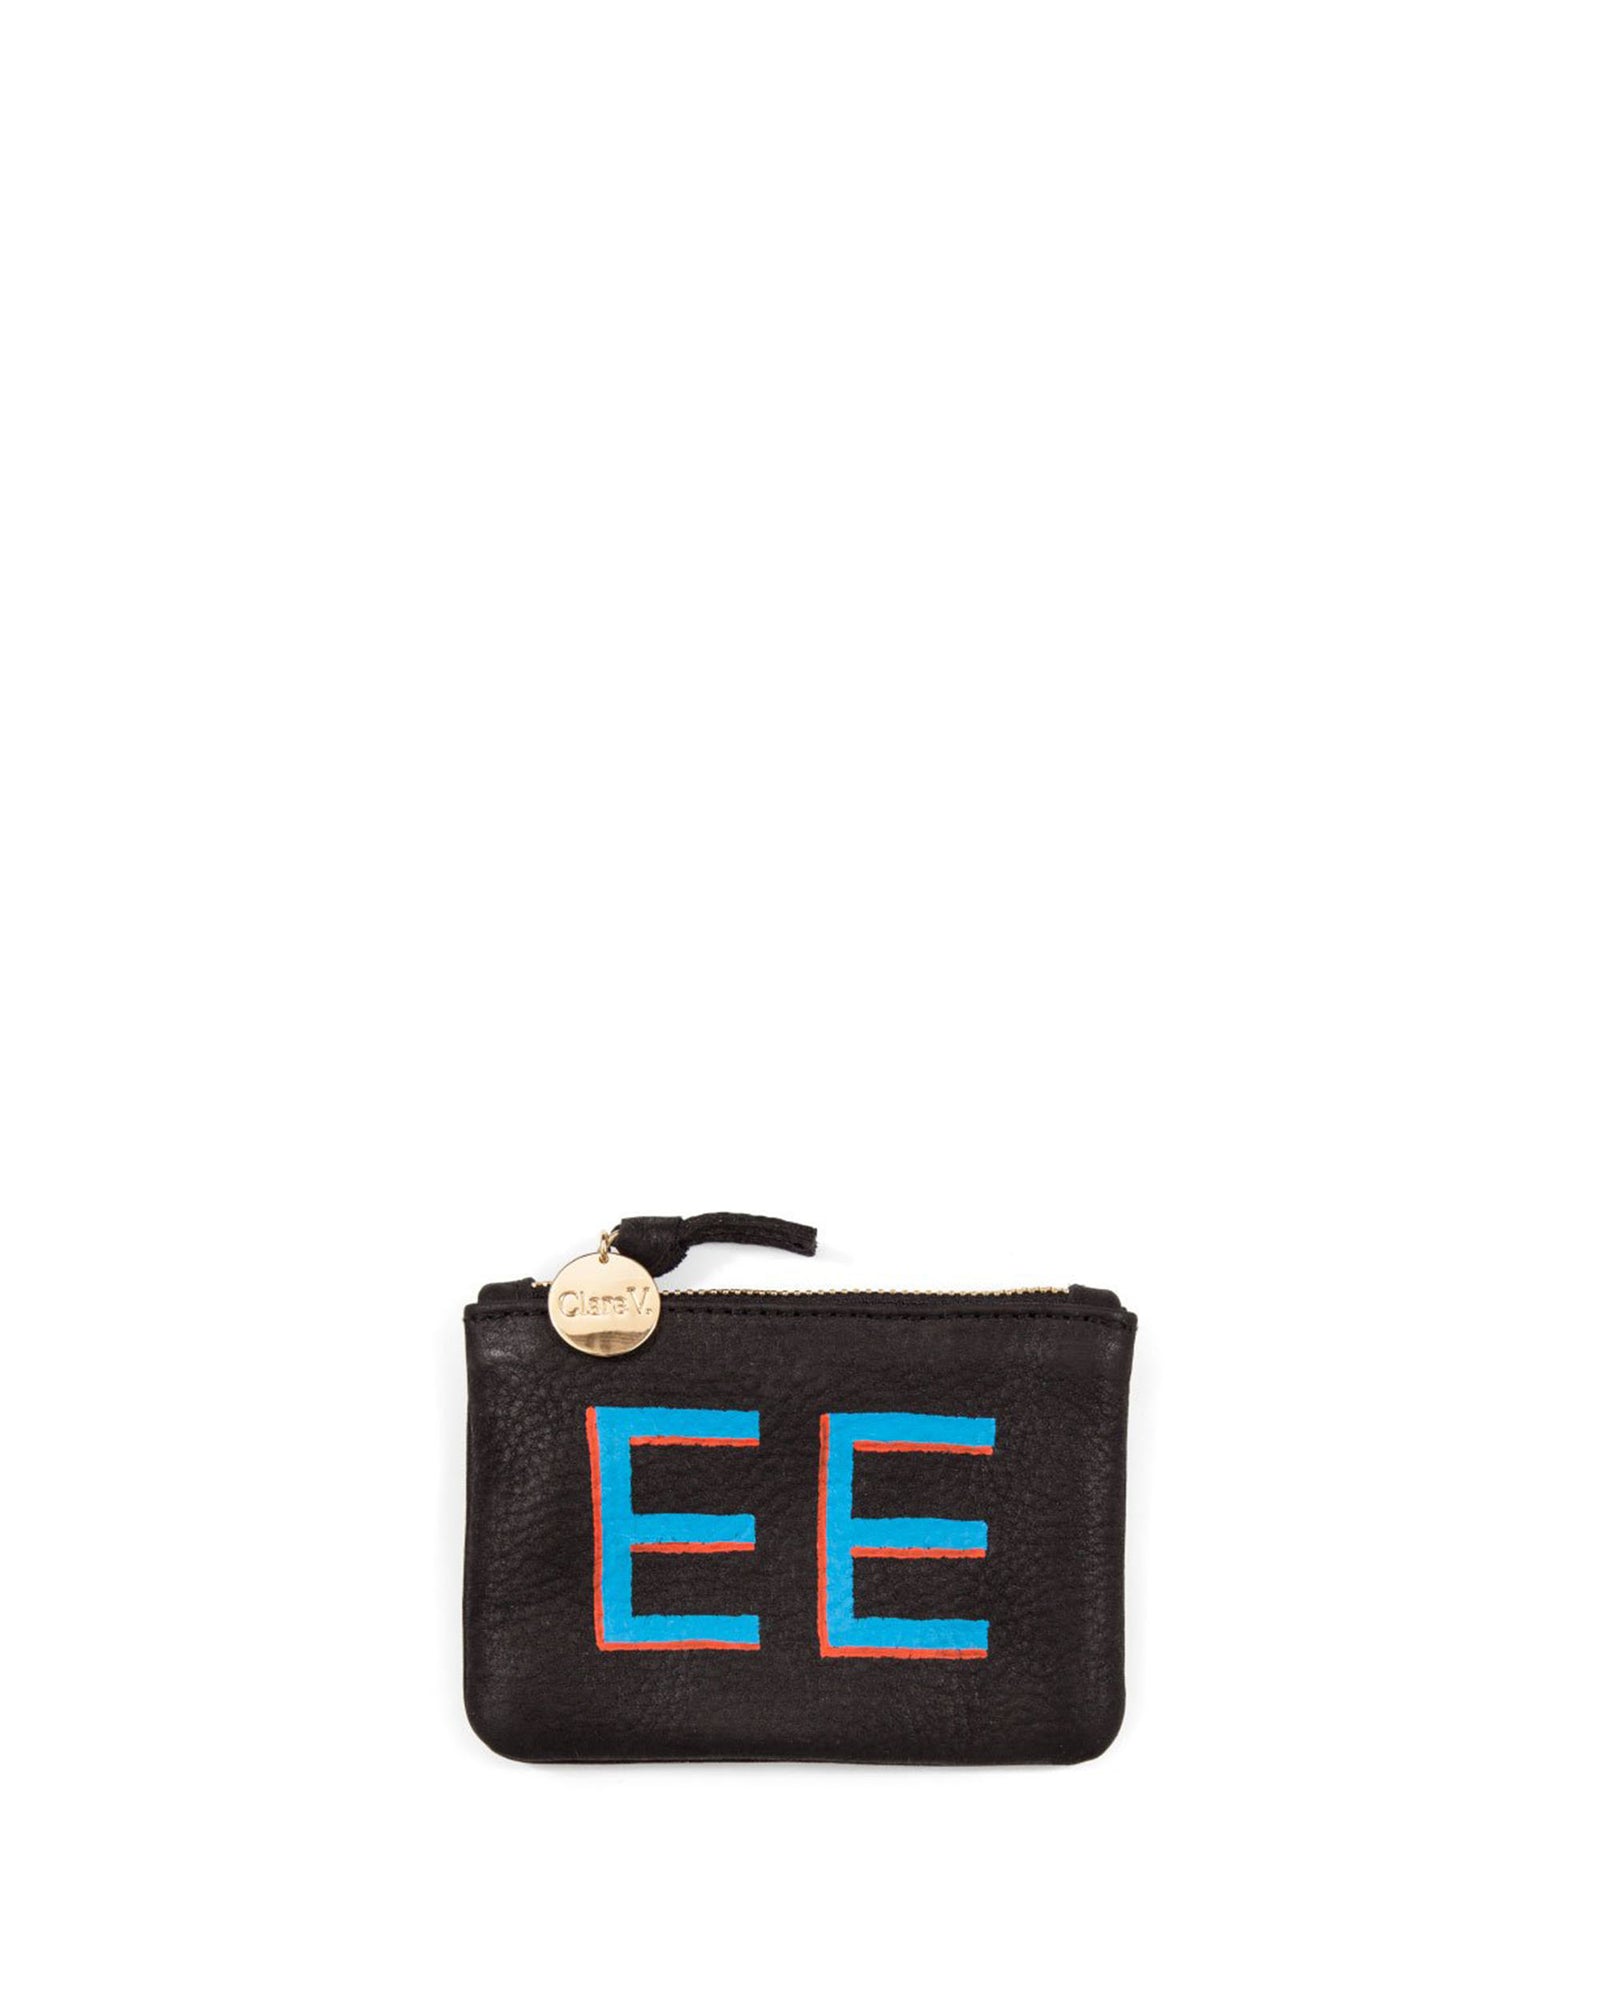 Black Coin Clutch with Hand Painted Monogram